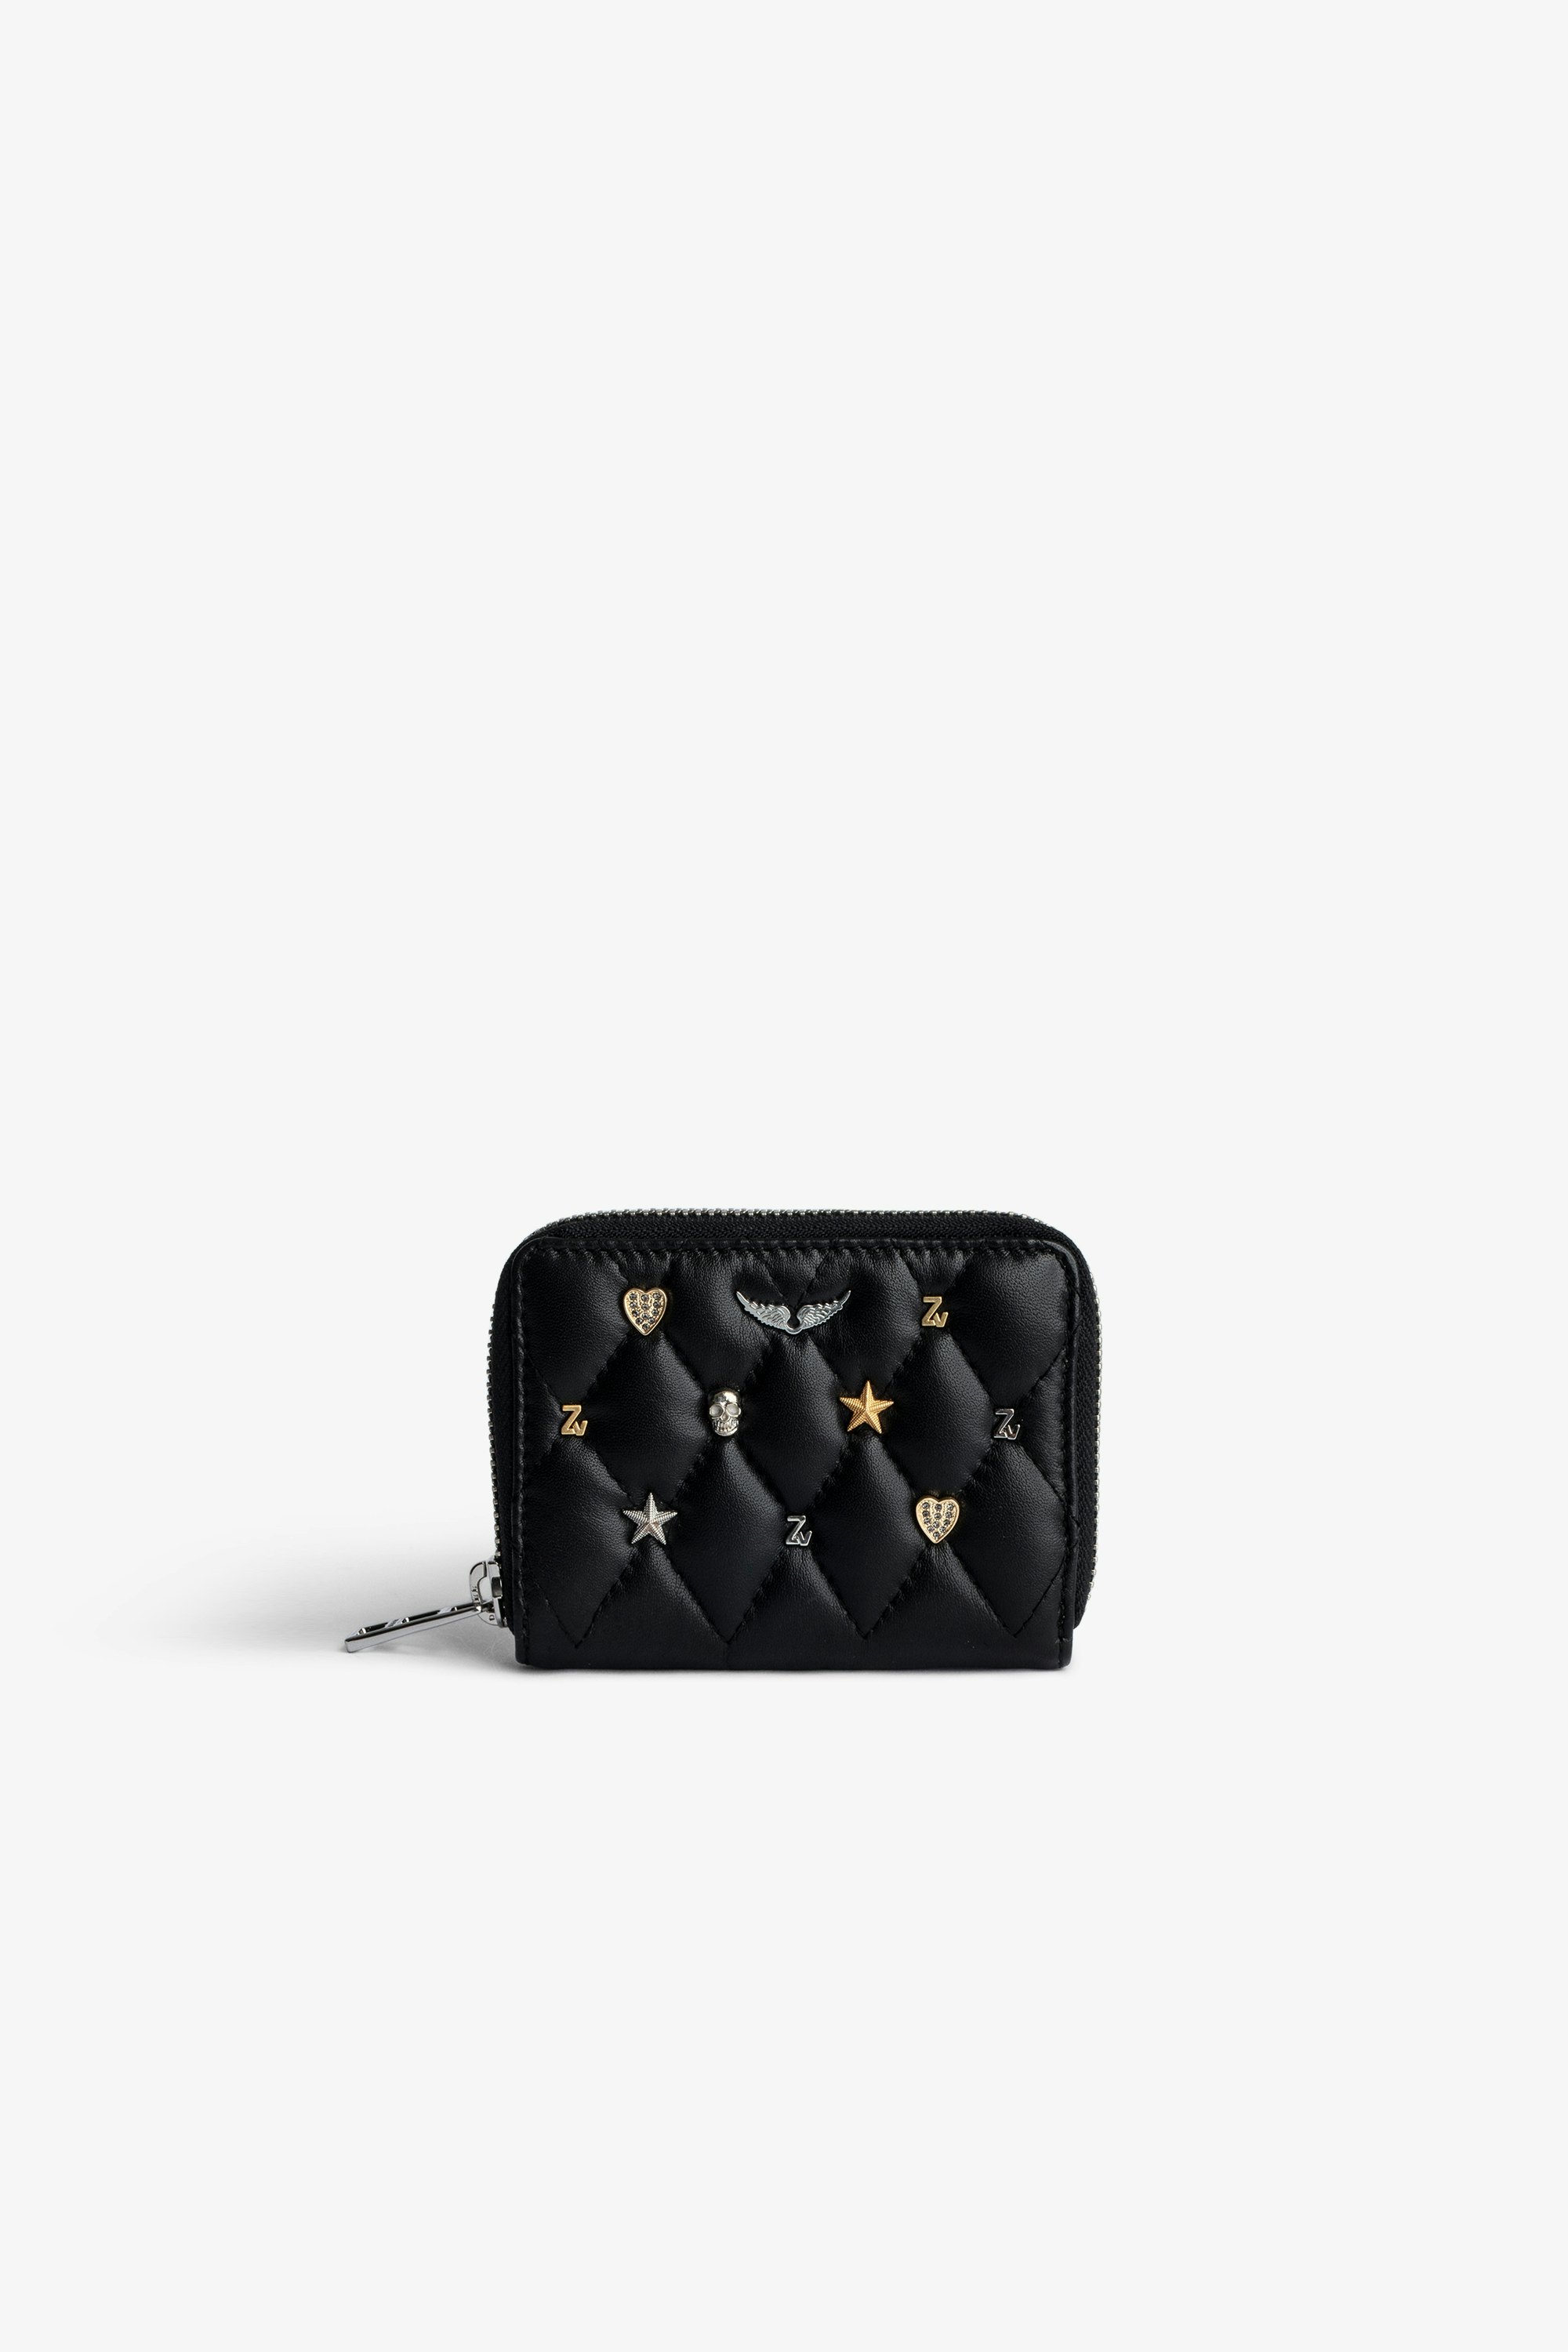 Mini ZV Coin Purse Women’s black quilted leather coin purse with silver- and gold-tone charms.